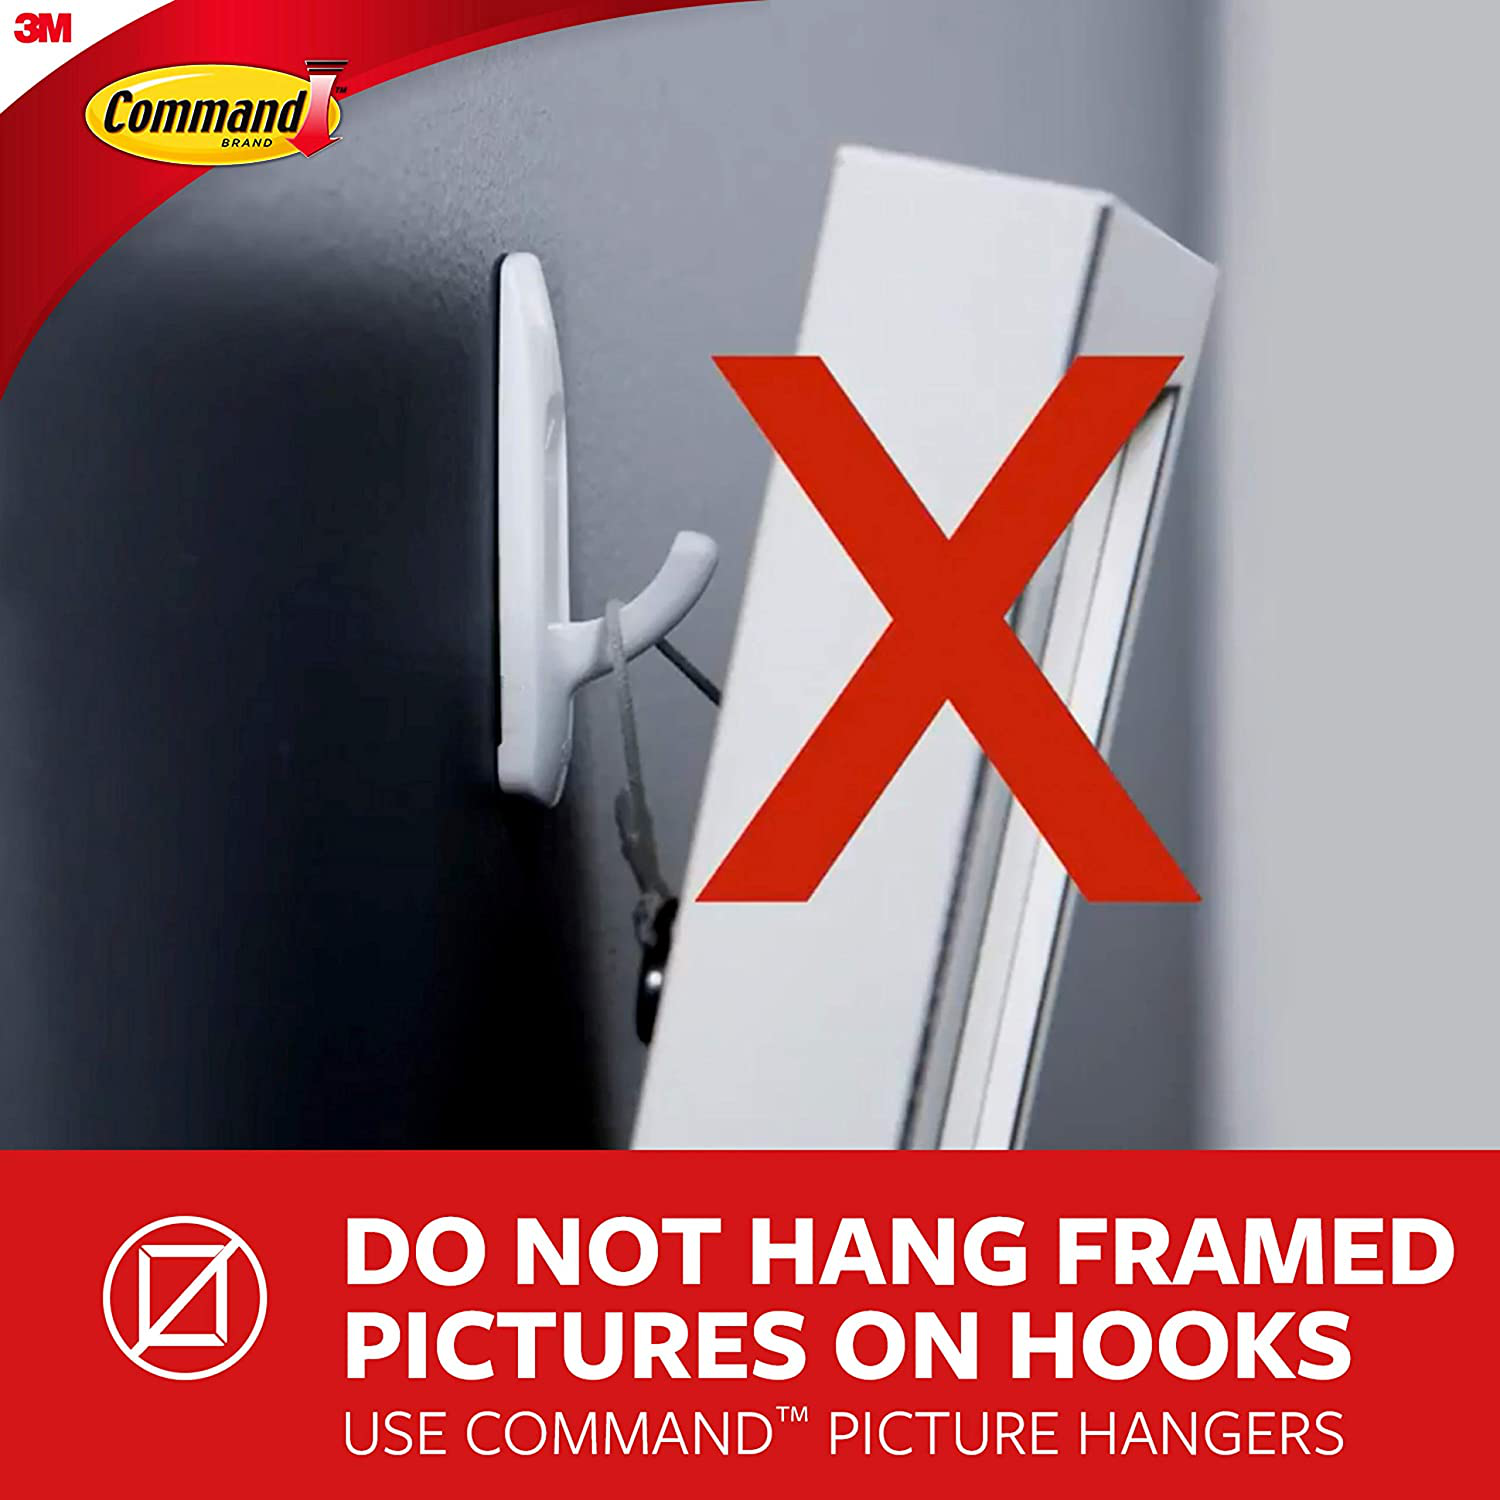 3M CLAW Drywall Picture Hangers holds 45 lb. & Command Outdoor Light Clips, 20 Clips, 24 Strips